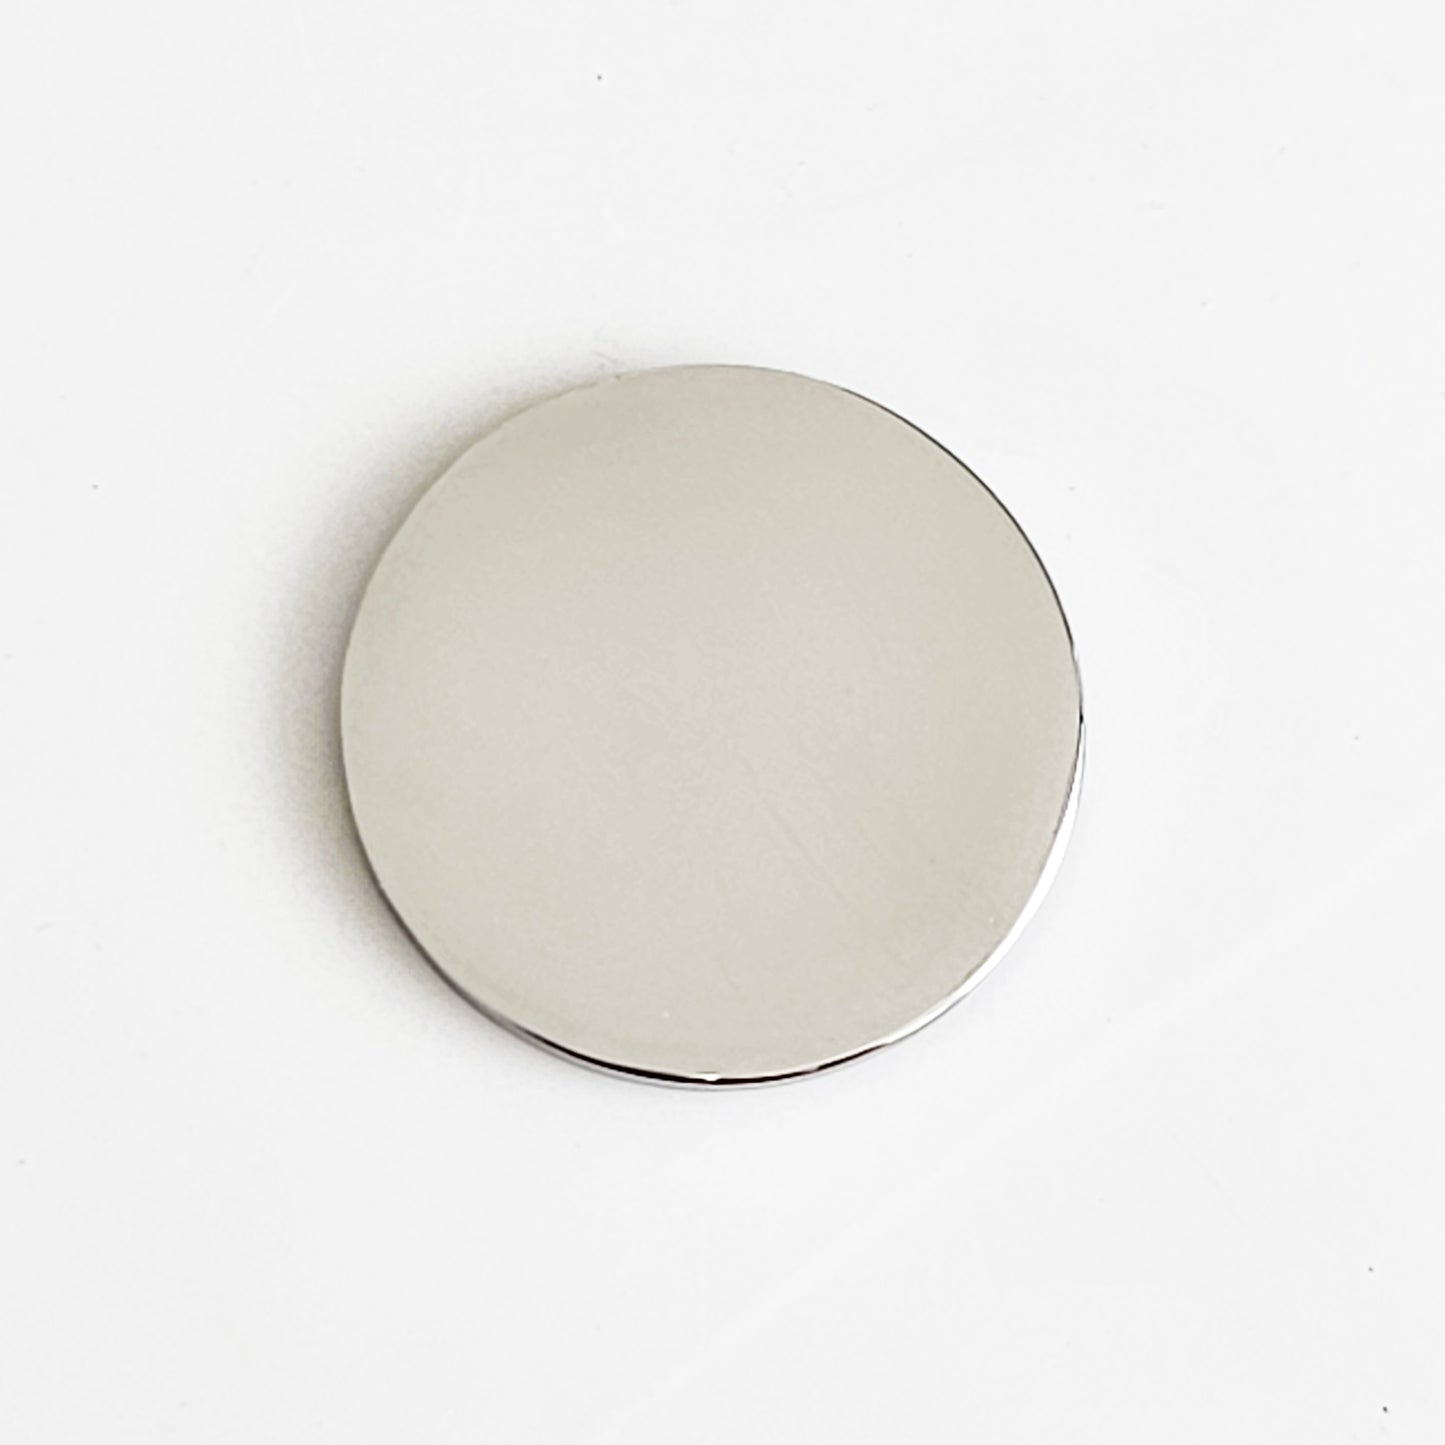 Stainless Steel - 3/4" Circle (no hole)